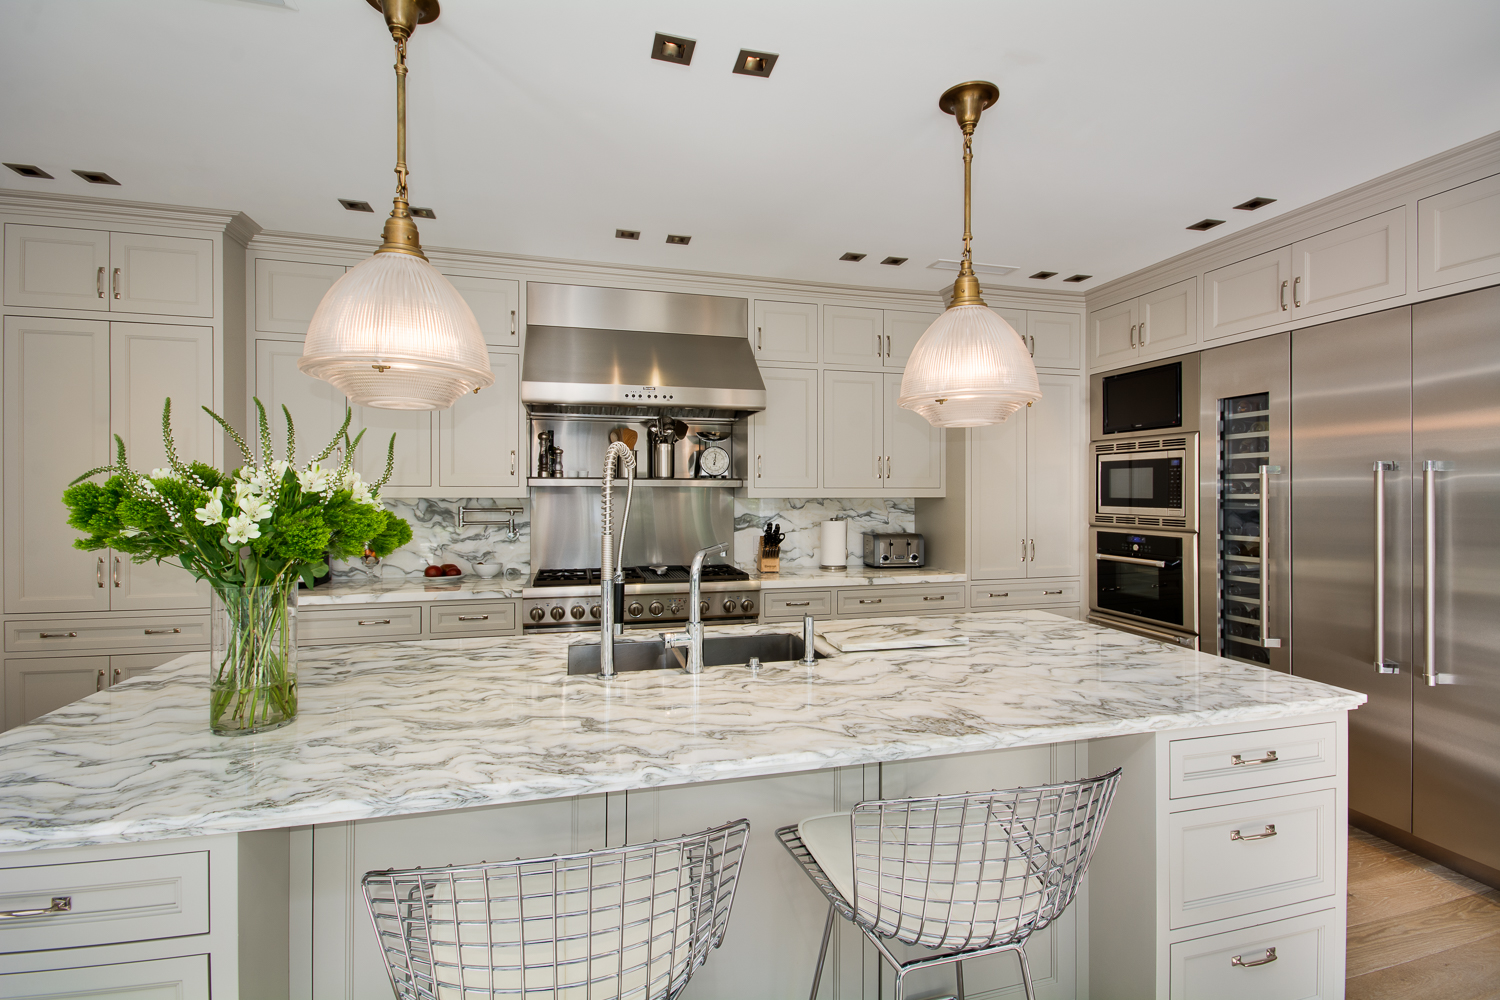 Improve Your Home’s Value Through Inexpensive Kitchen Upgrades